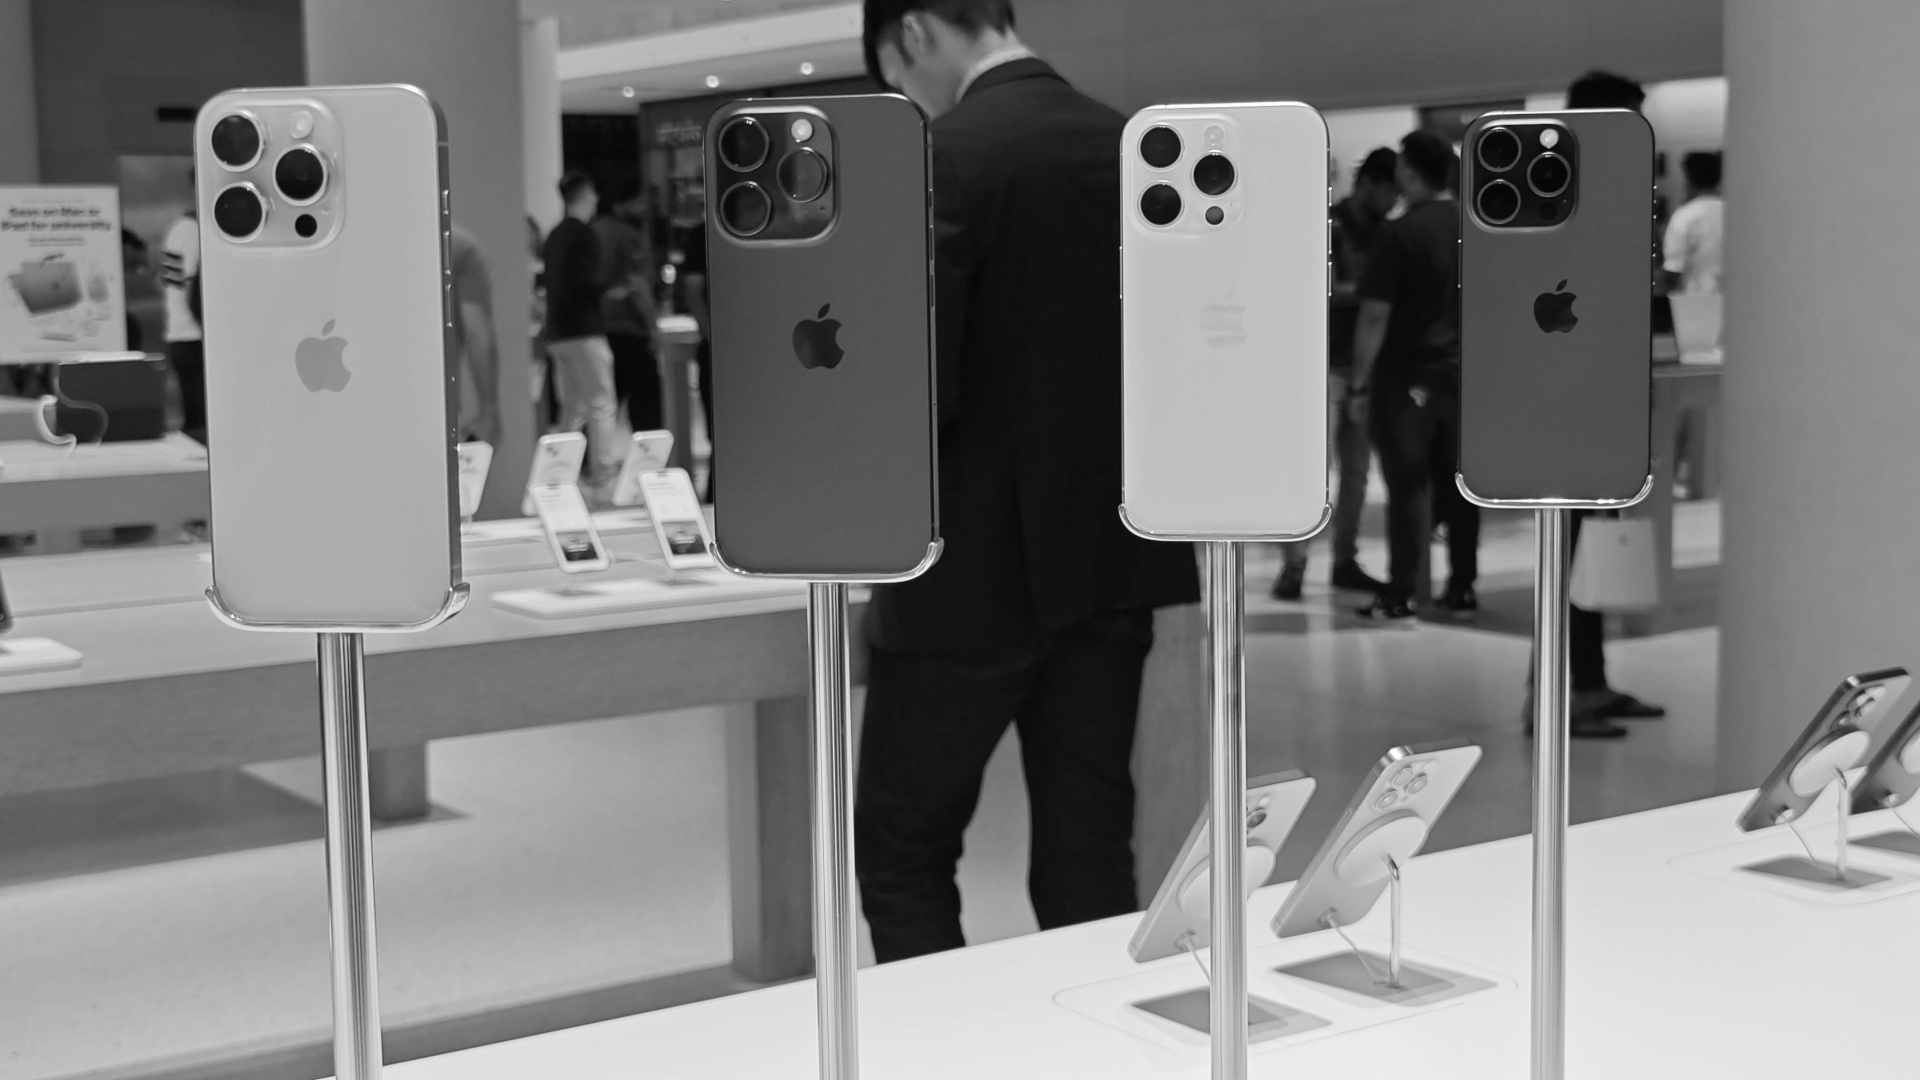 iPhones in store black and white